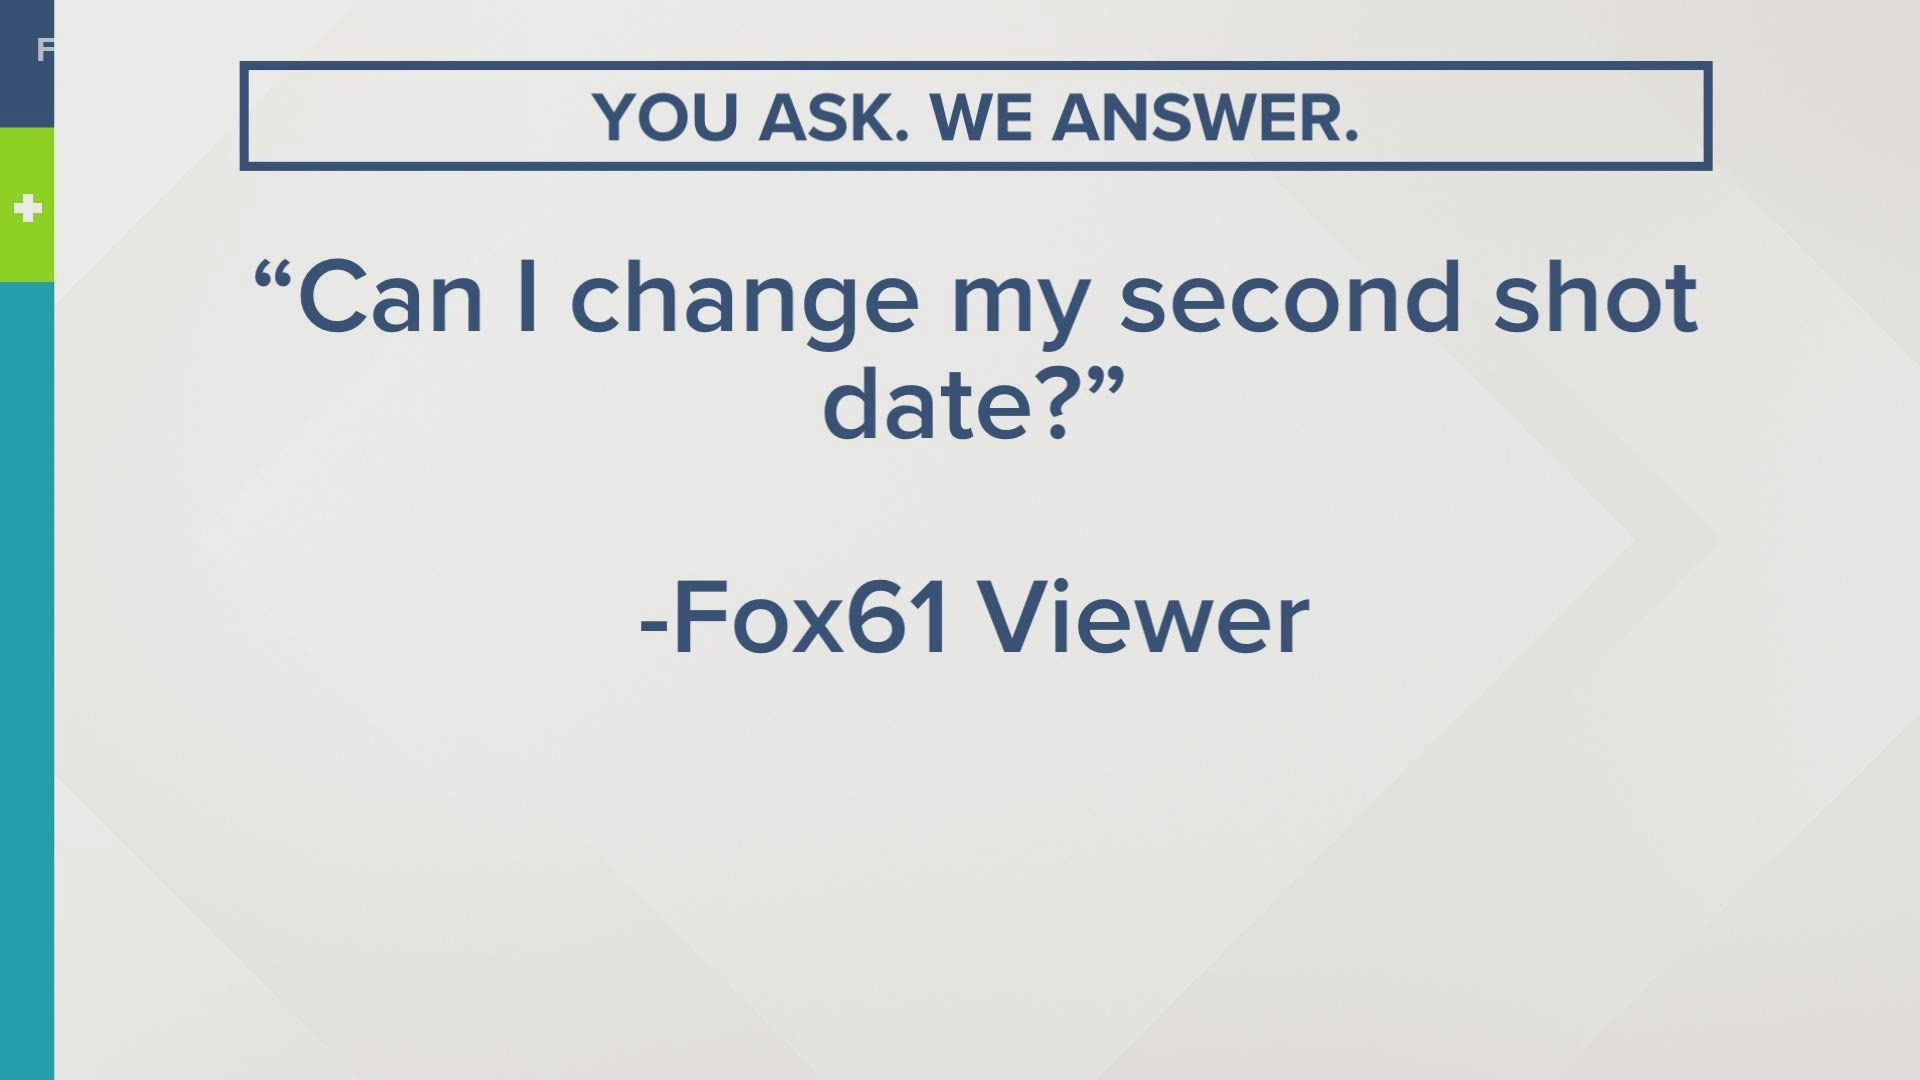 If you have a question for the FOX61 Vaccine Team, email SHARE61@fox61.com or text 860-527-6161.